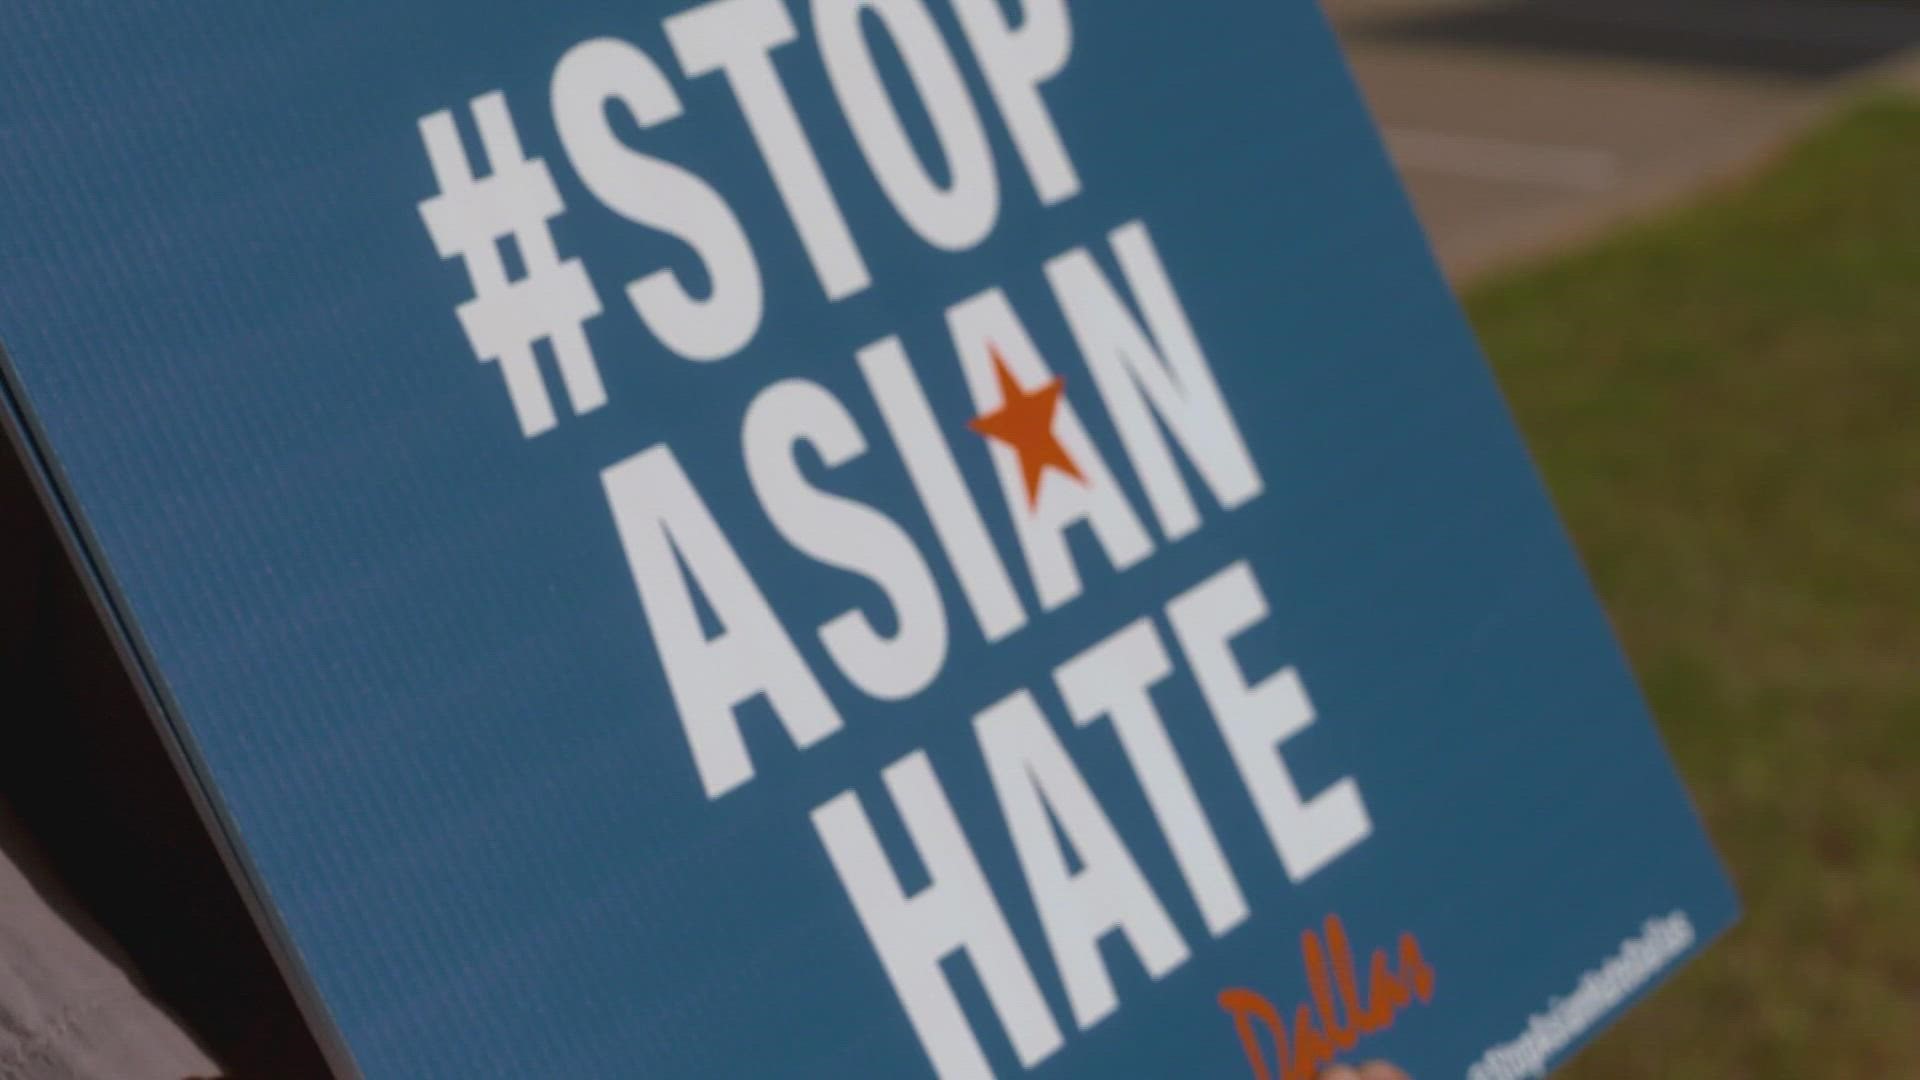 Jonas Park stood outside the shops in Koreatown in Dallas holding a sign that reads, "Stop Asian Hate."